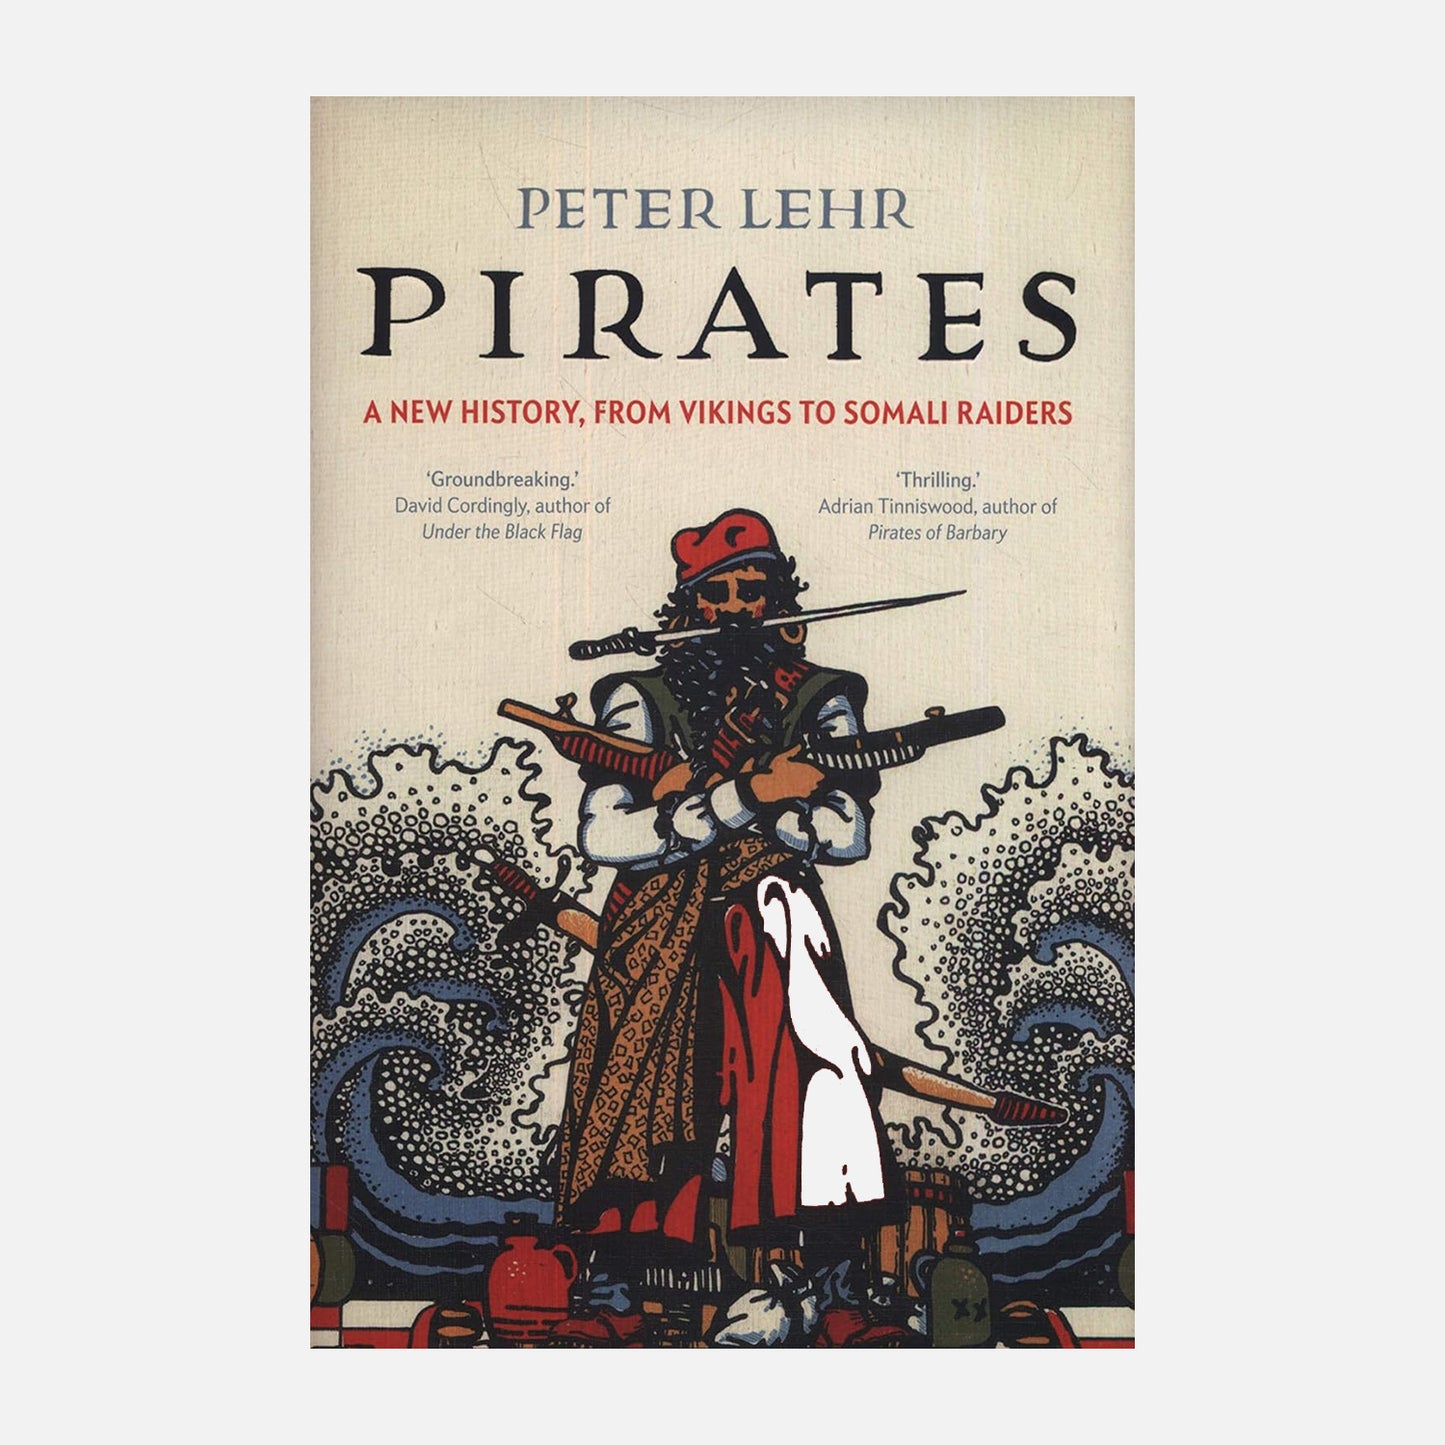 Cover showing a pirate with a sword in his mouth and pointing two guns